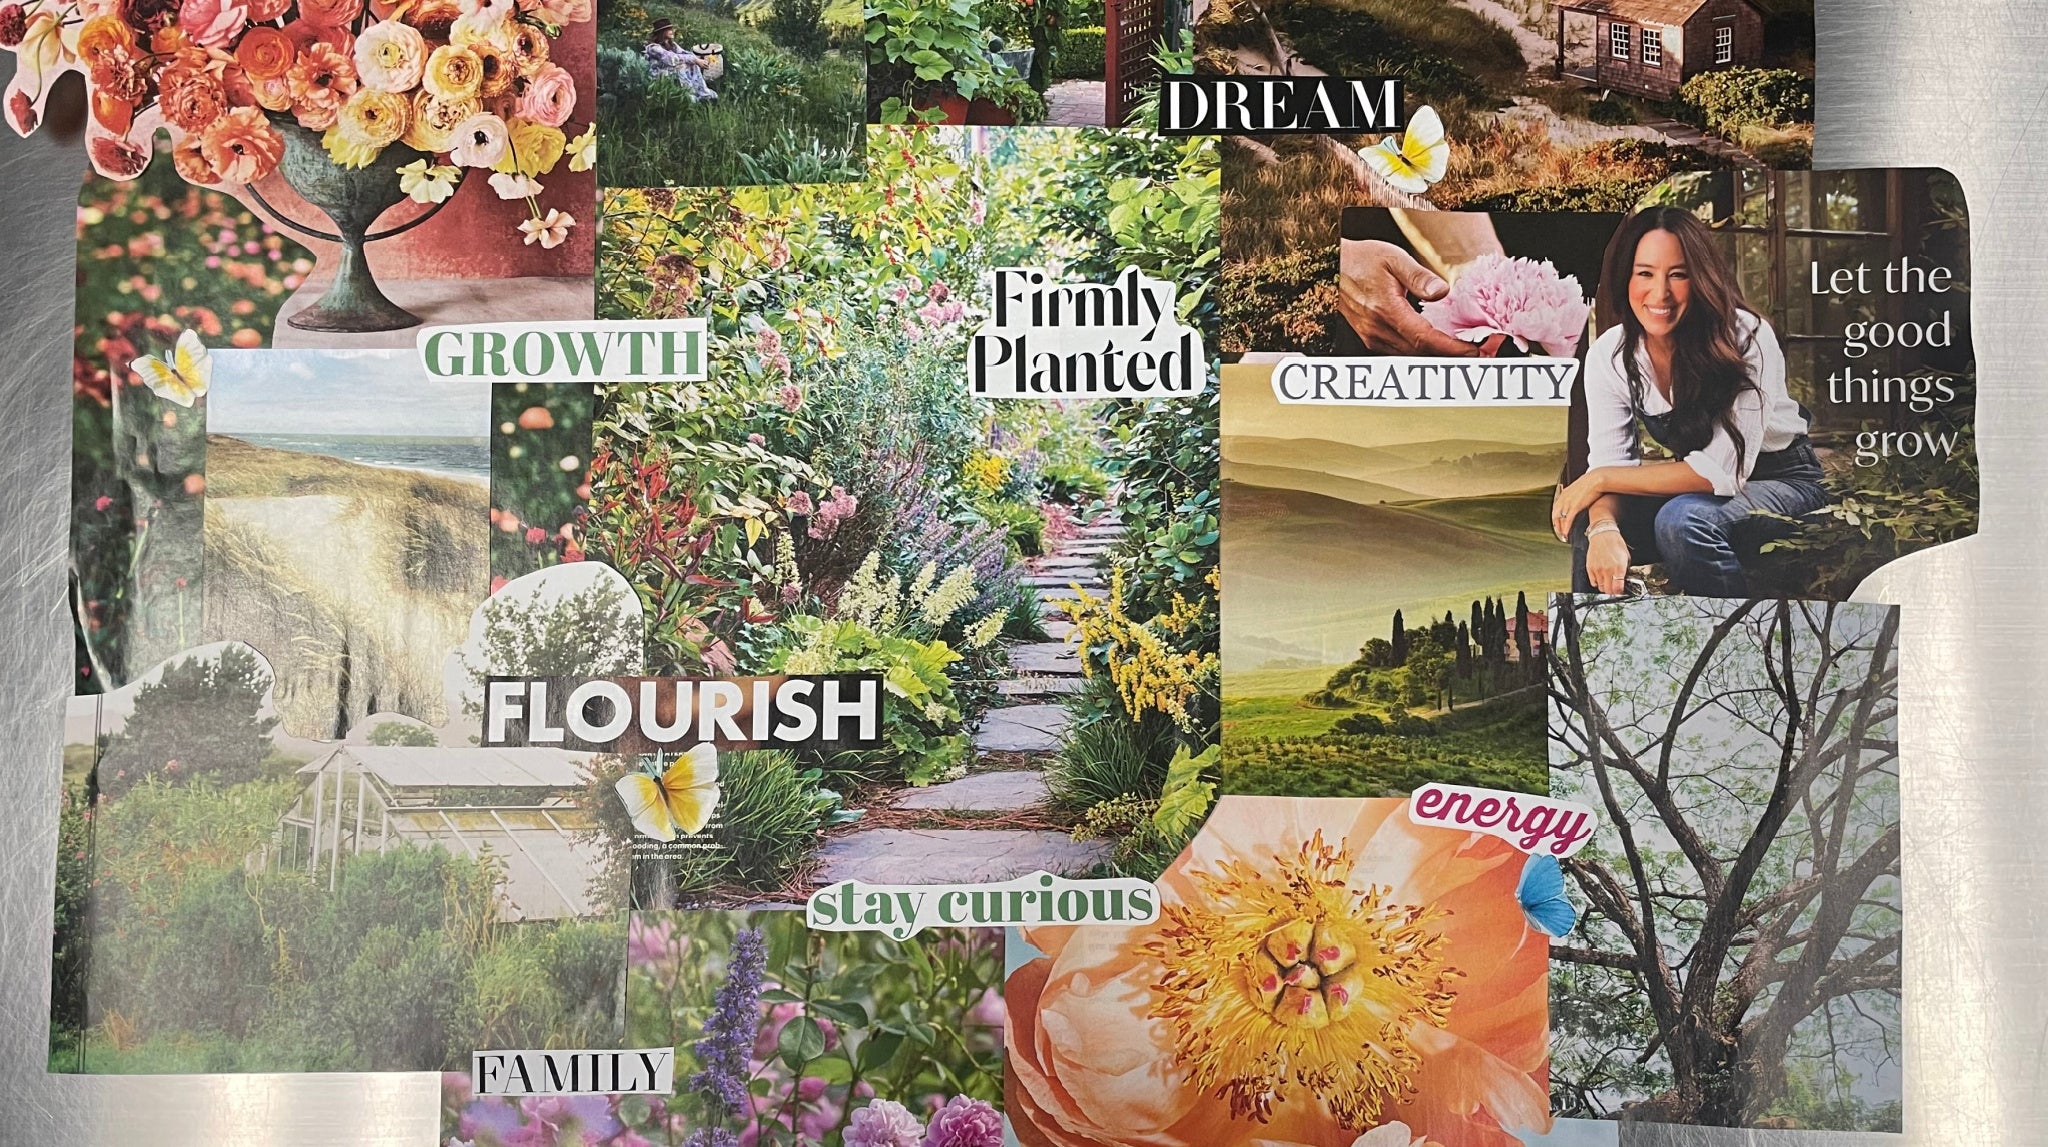 vision board with beautiful images of flowers, trees and oceans with key words like "family", "flourish" and "creativity" throughout